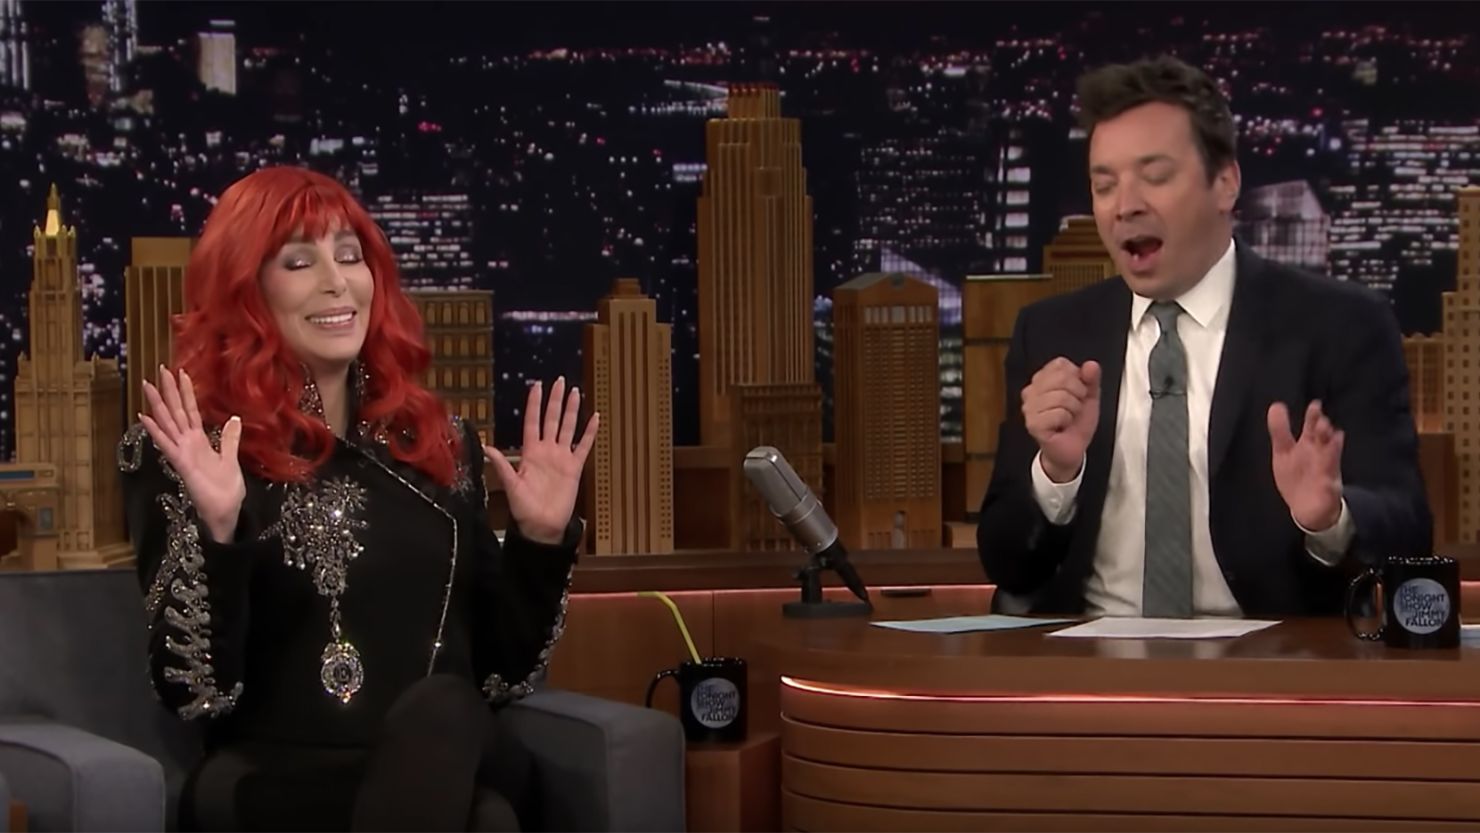 Cher hates people doing impressions of her